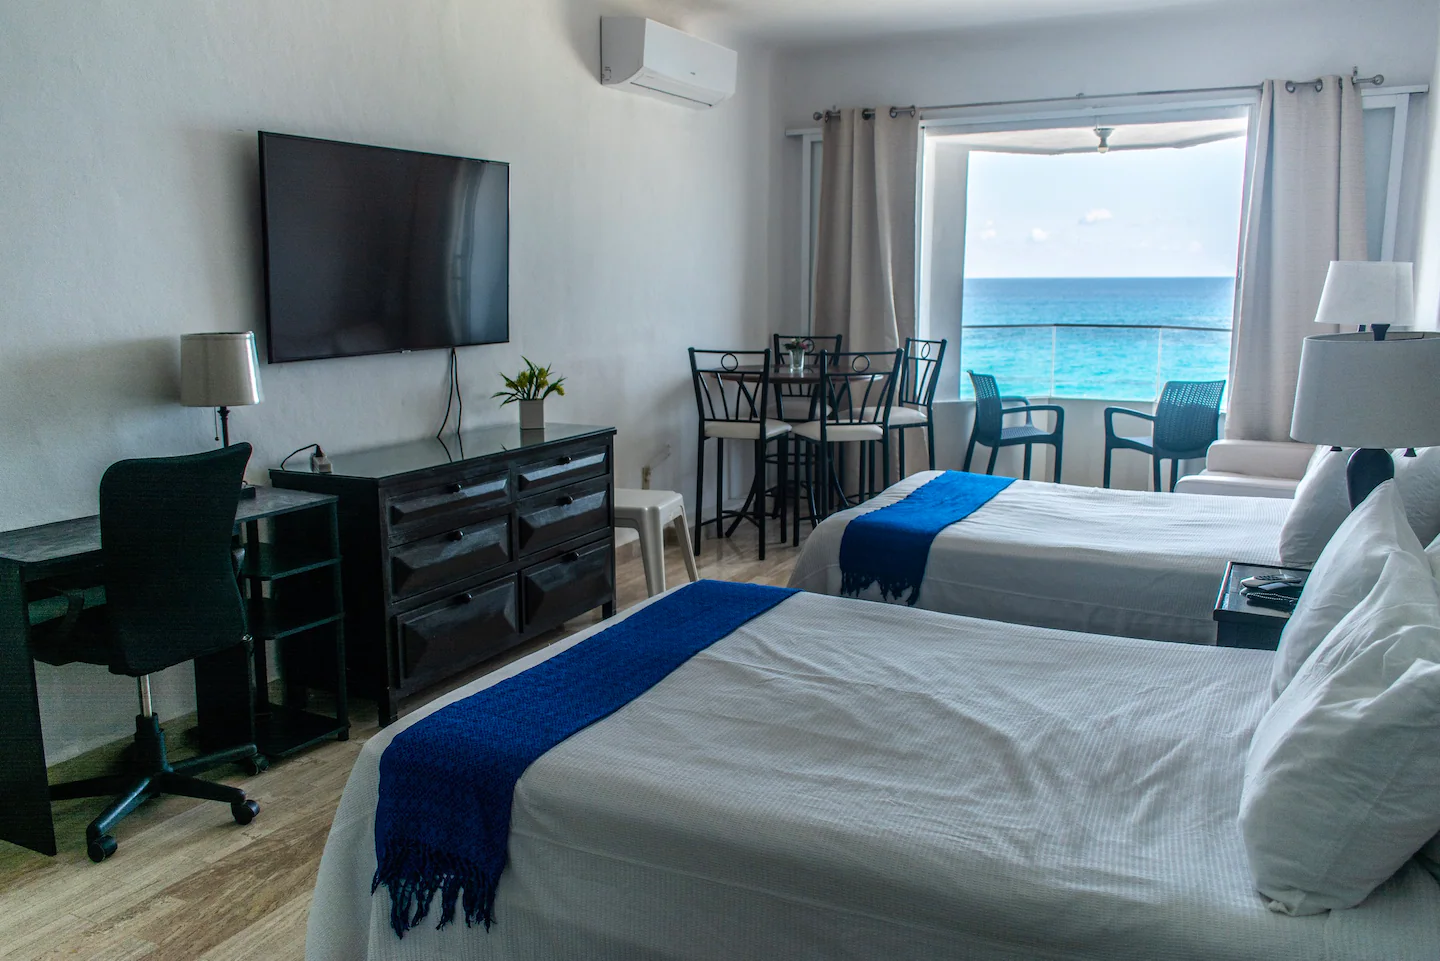 Gorgeous view of the oceanfront Airbnb, one of the best in Cancun